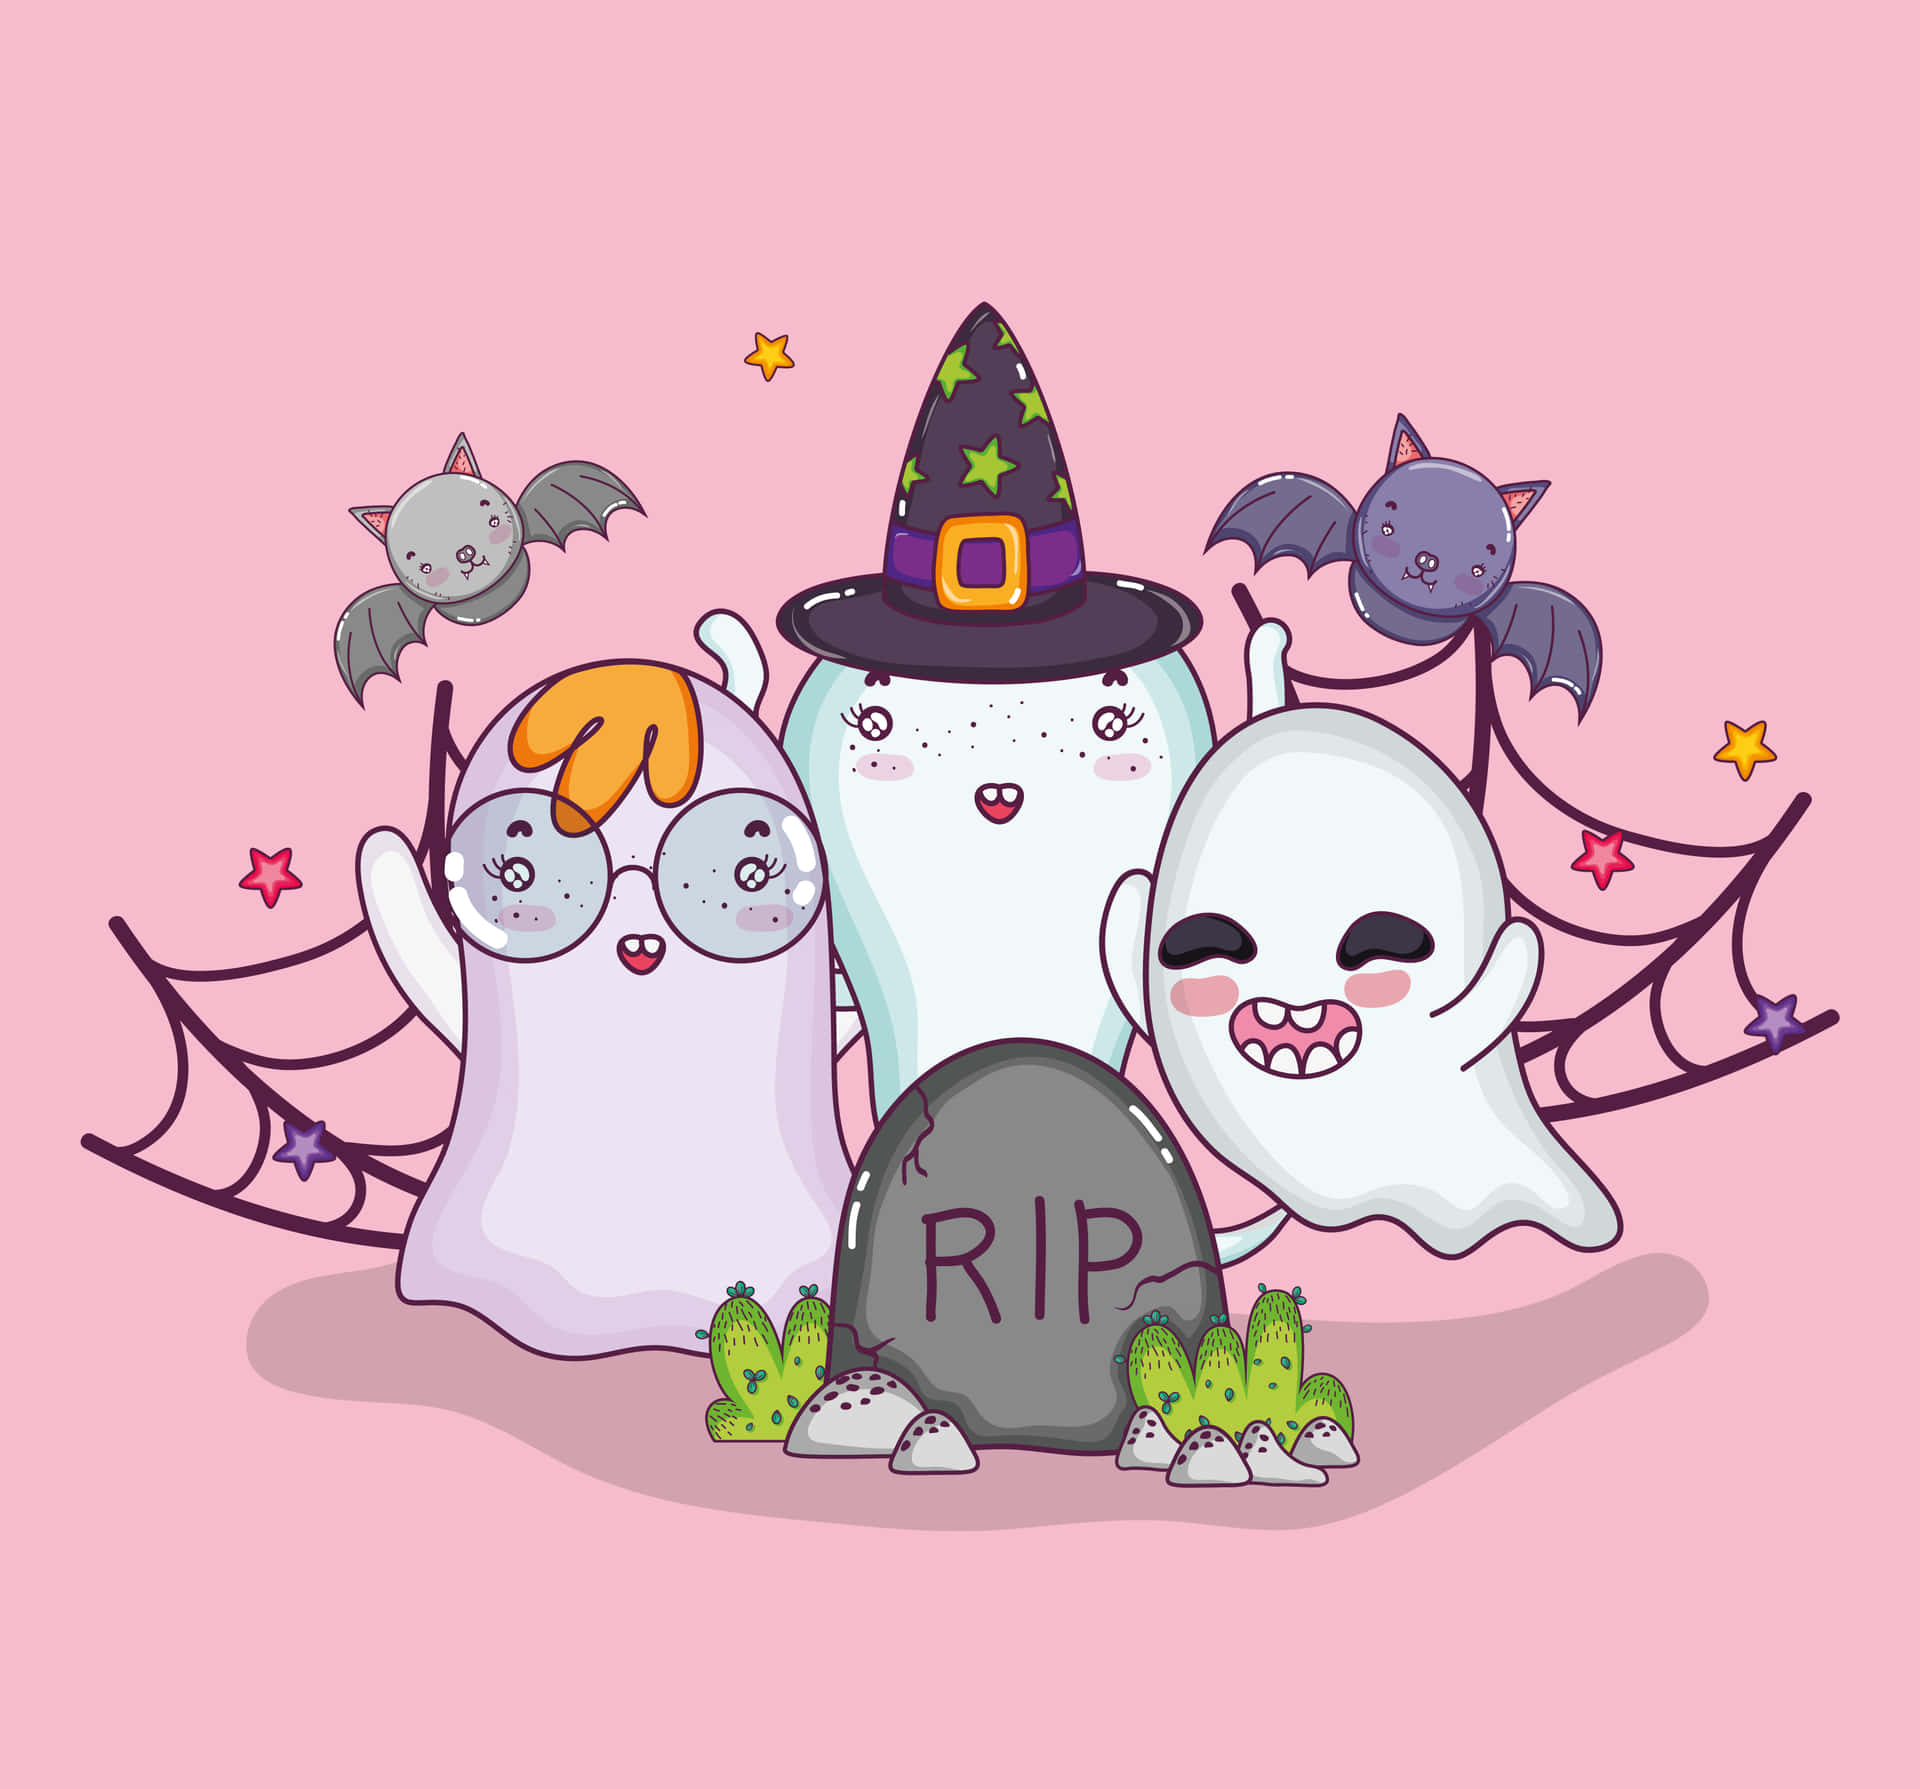 Celebrate this Cute Halloween with Fun, Frights and Furry Friends